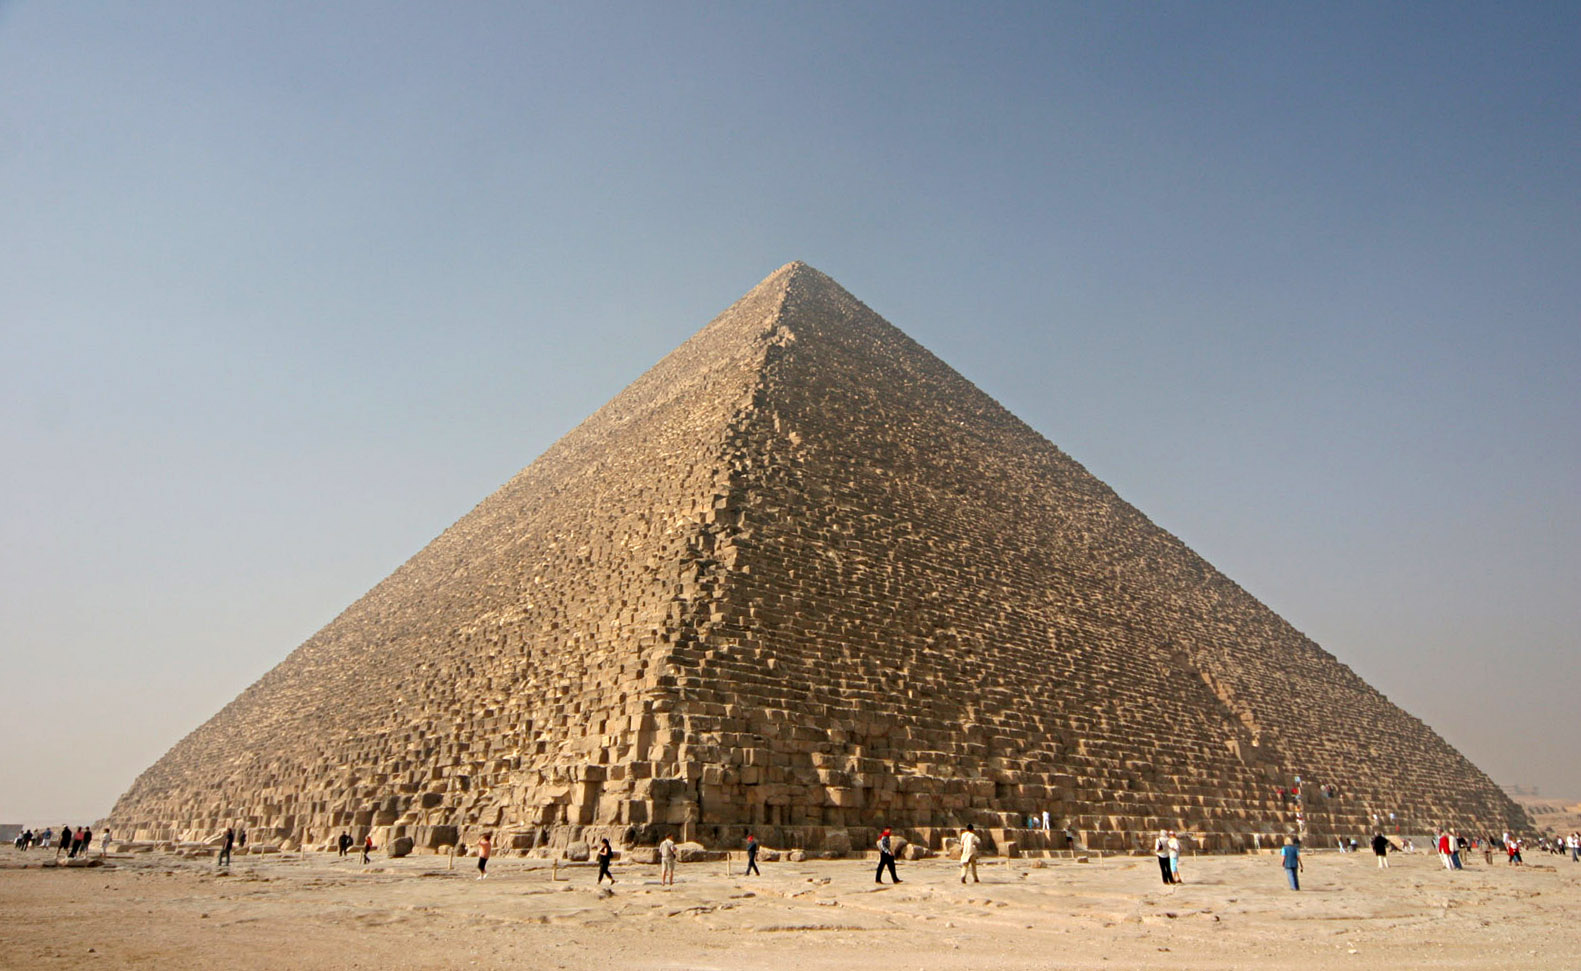 Tourist walking around the base of the Great Pyramid of Giza